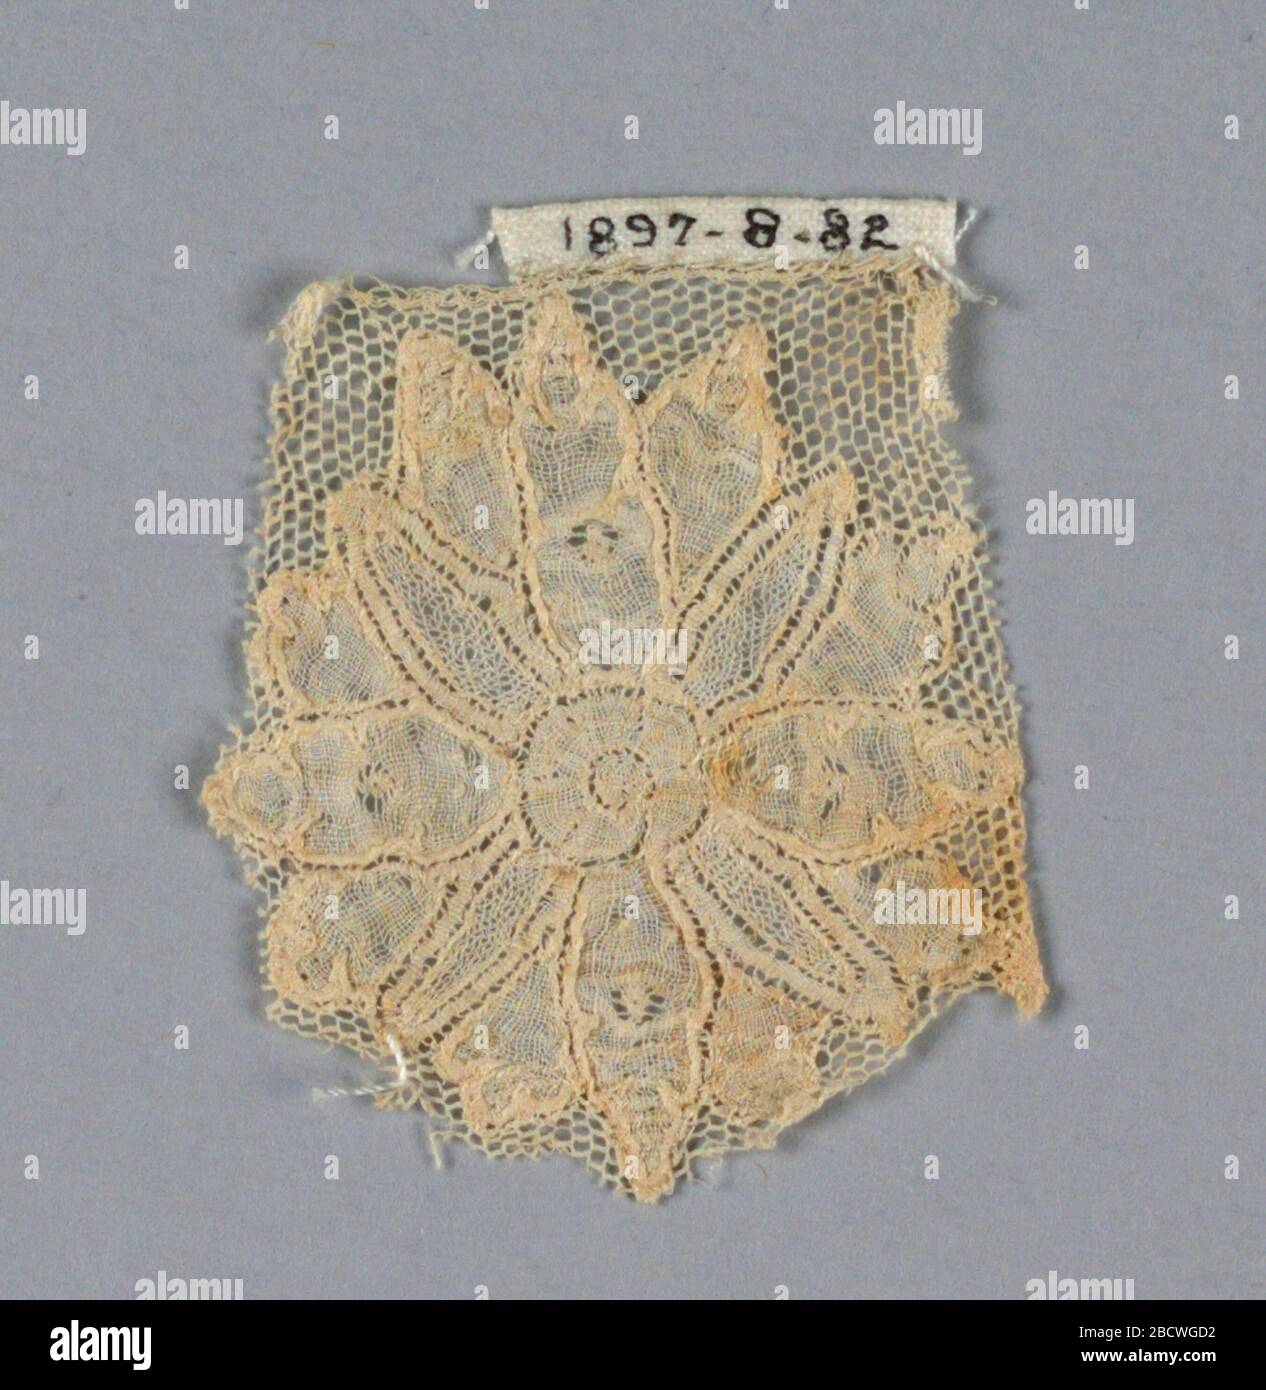 Fragment. Research in ProgressFragment has a single flowerhead mainly in clothwork with some petals containing decorative fillings. Vrai droschel ground. Fragment Stock Photo